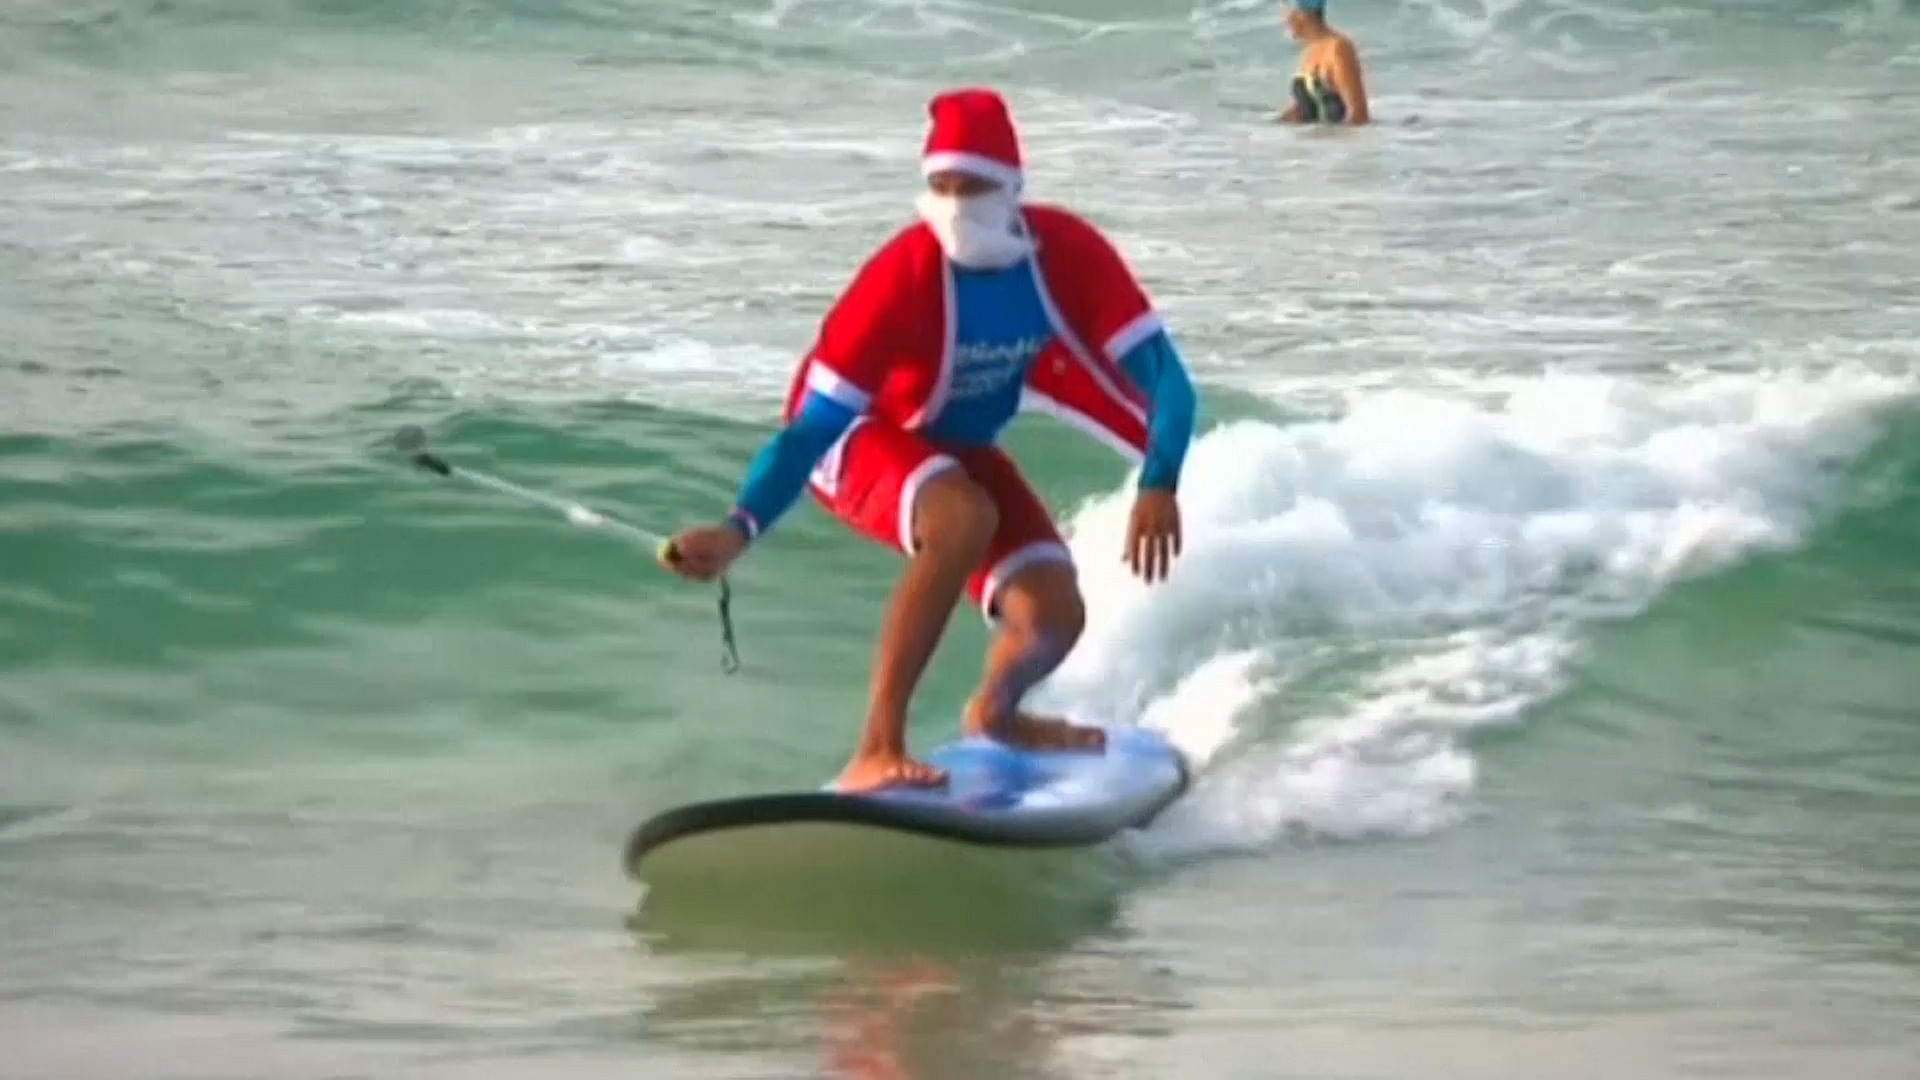 

Santa Claus swapped his sleigh for a surfboard at Sydney’s Bondi Beach with the ongoing Chrismas fever. (Photo: AP screengrab)